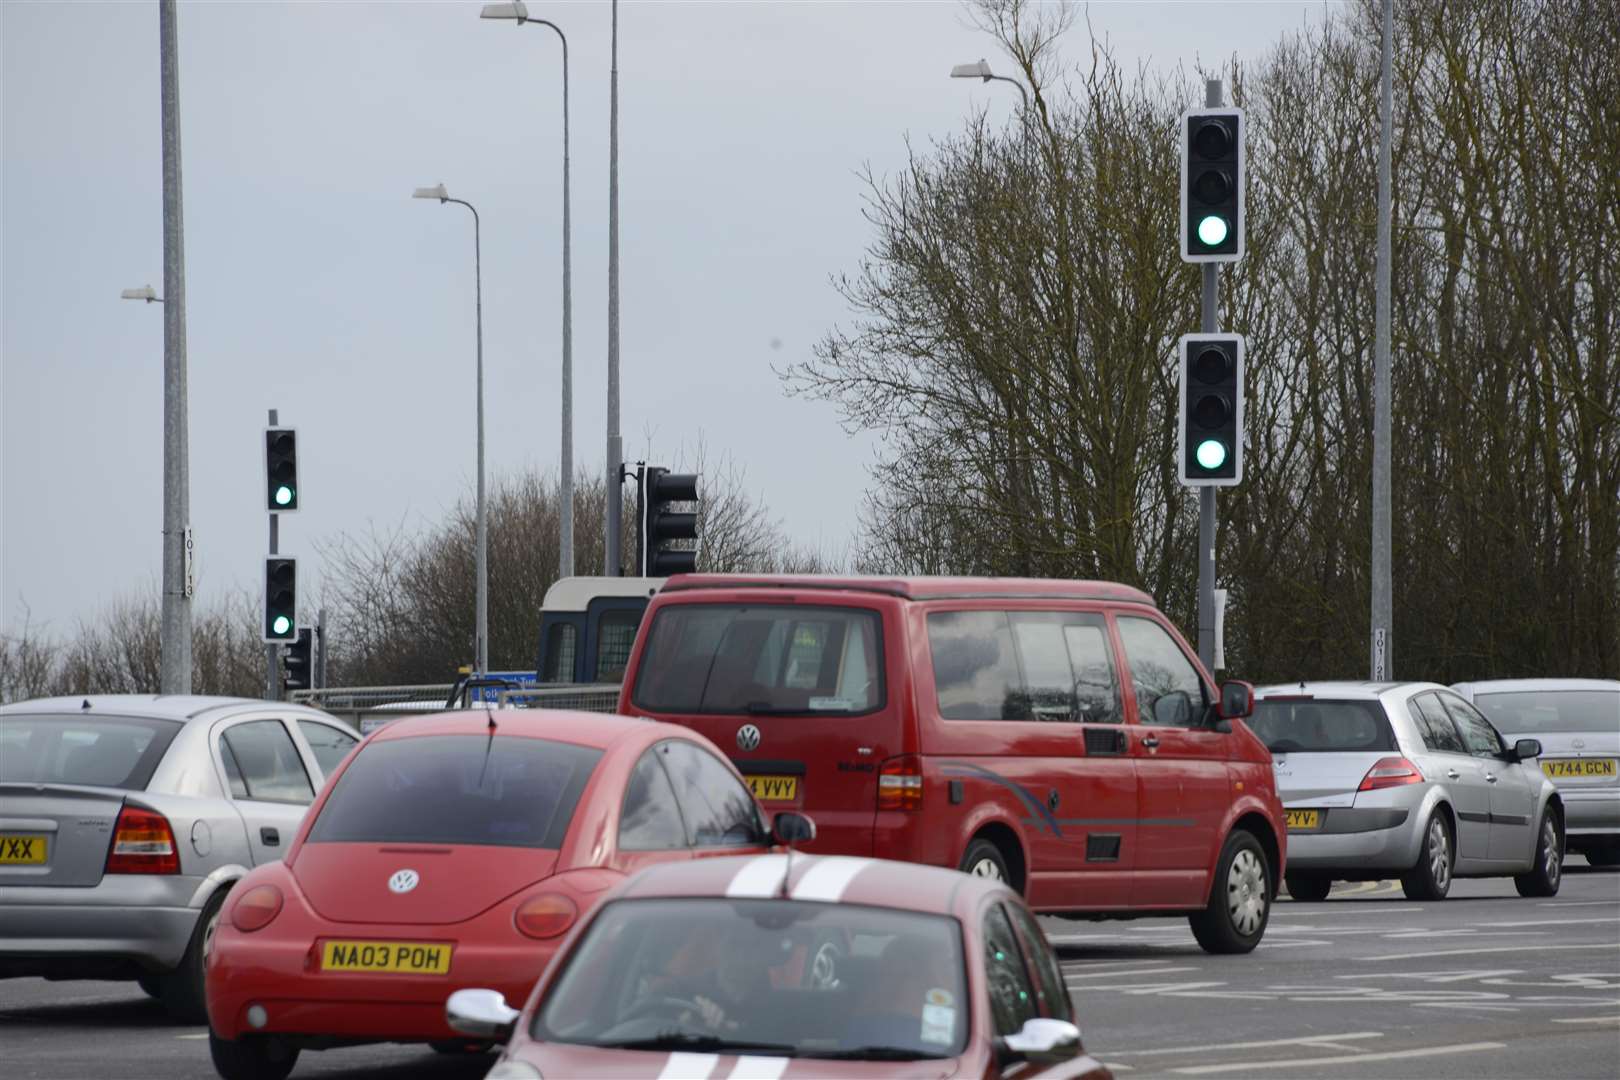 New traffic signals aren't working properly. Picture by Paul Amos